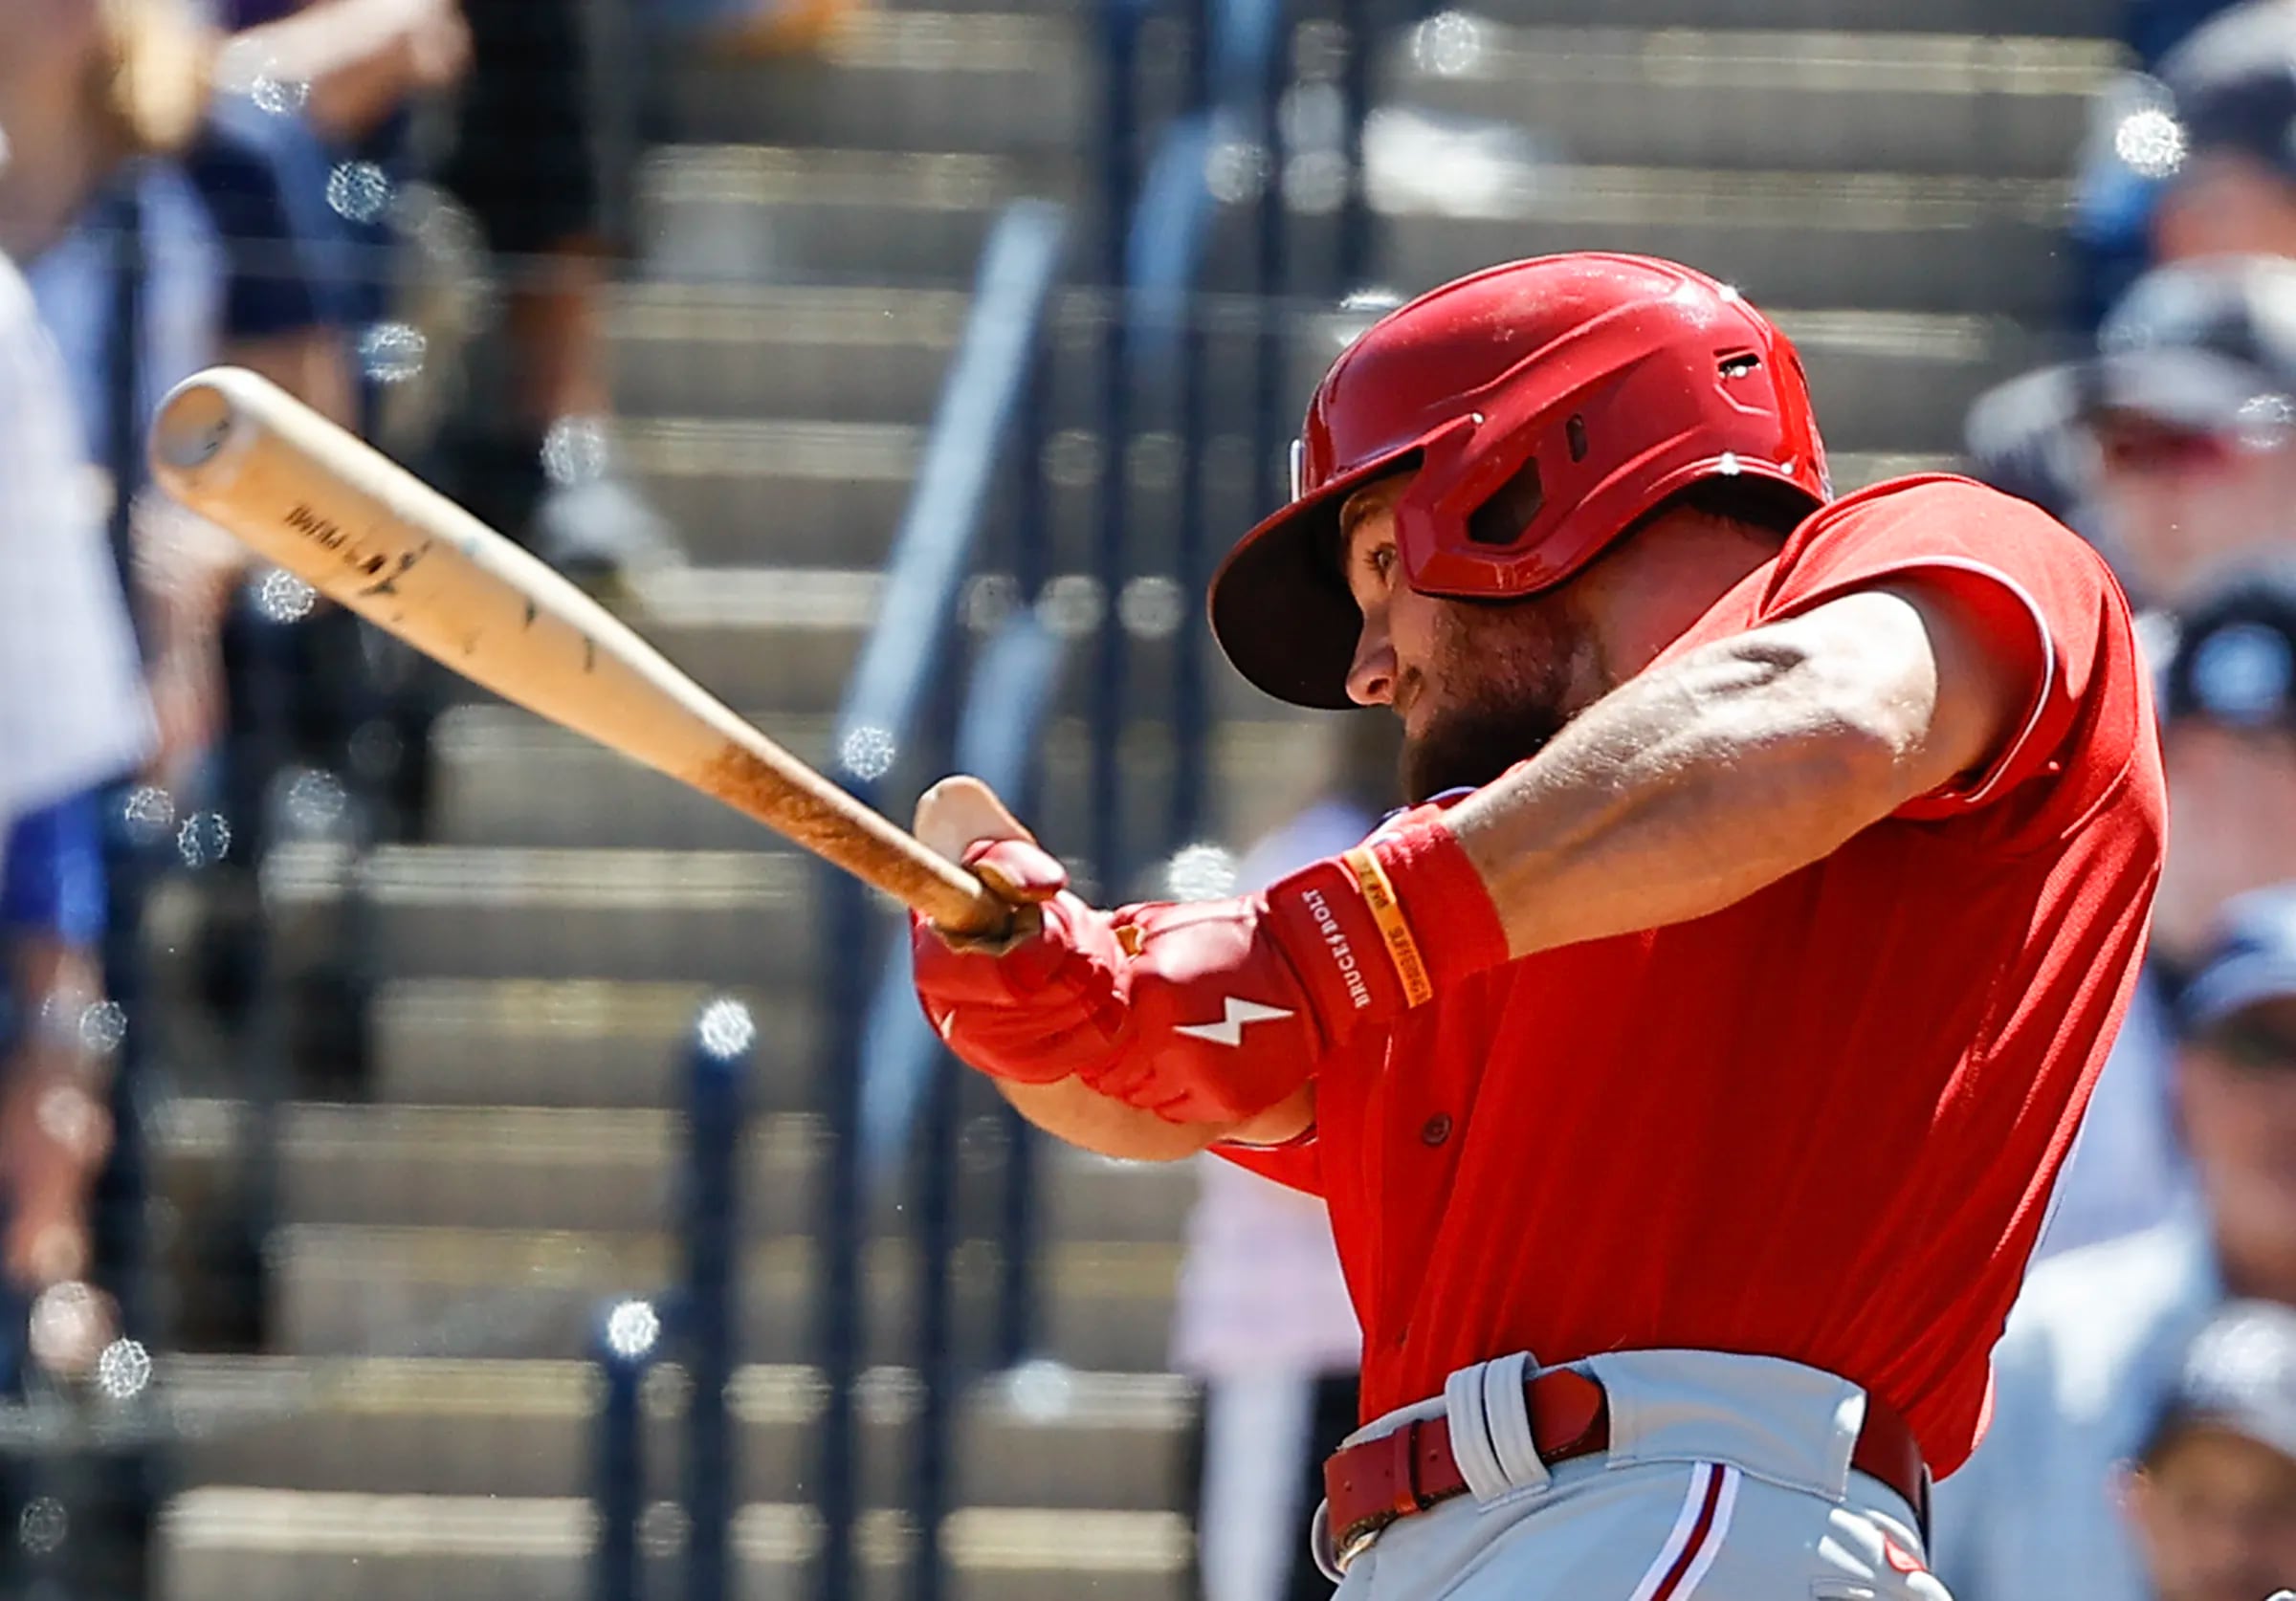 Photos from the Phillies spring training game win over the Yankees